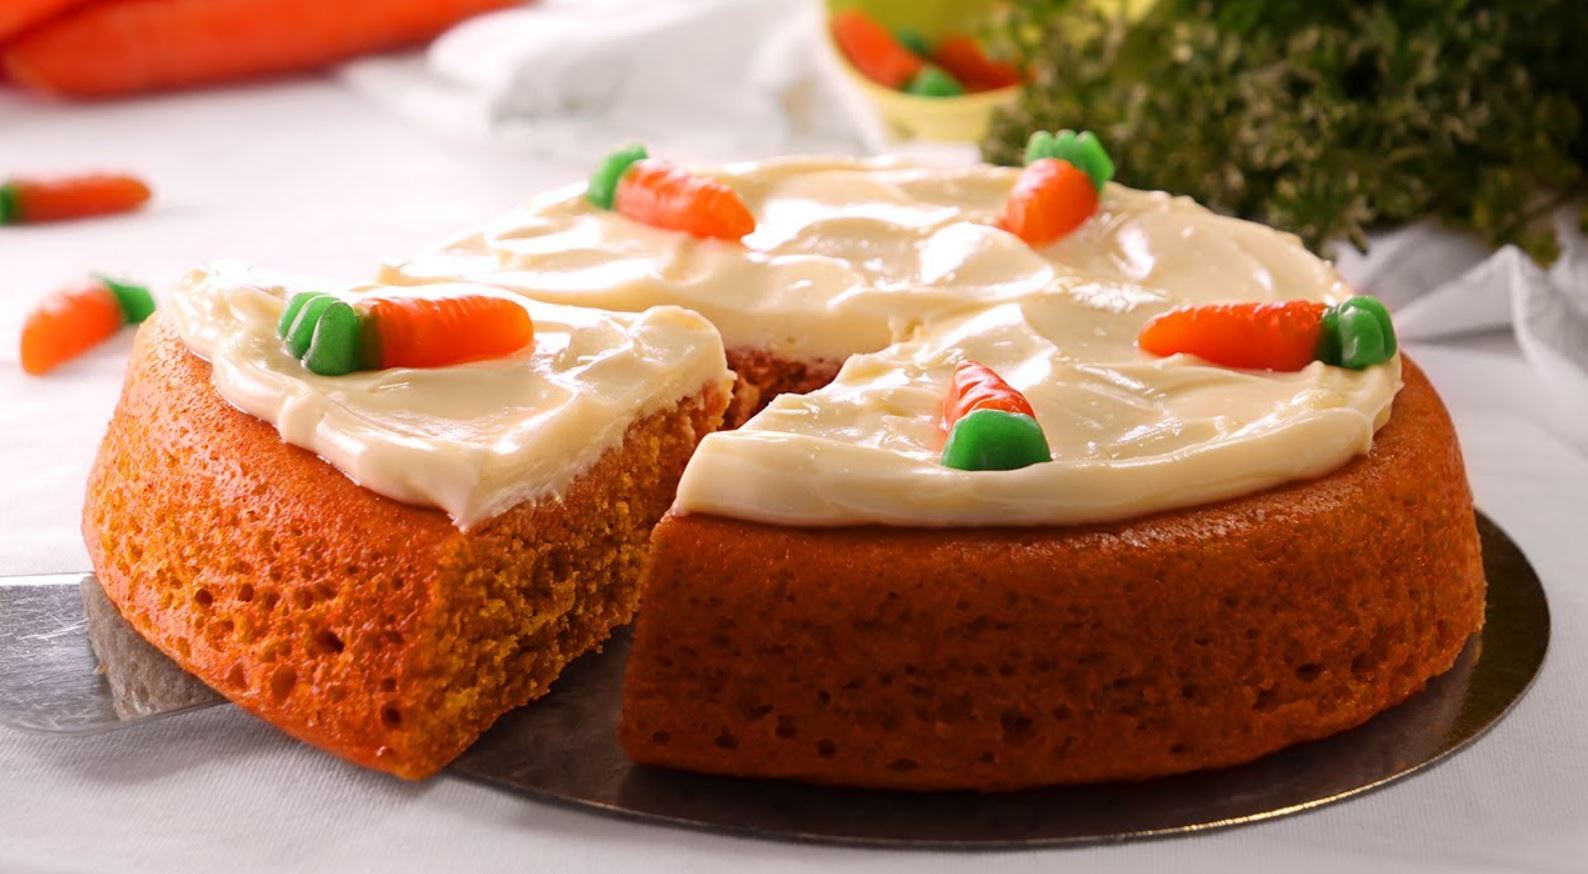 Eggless Carrot Cake with Cheese Cream Frosting Recipe - Subbus Kitchen